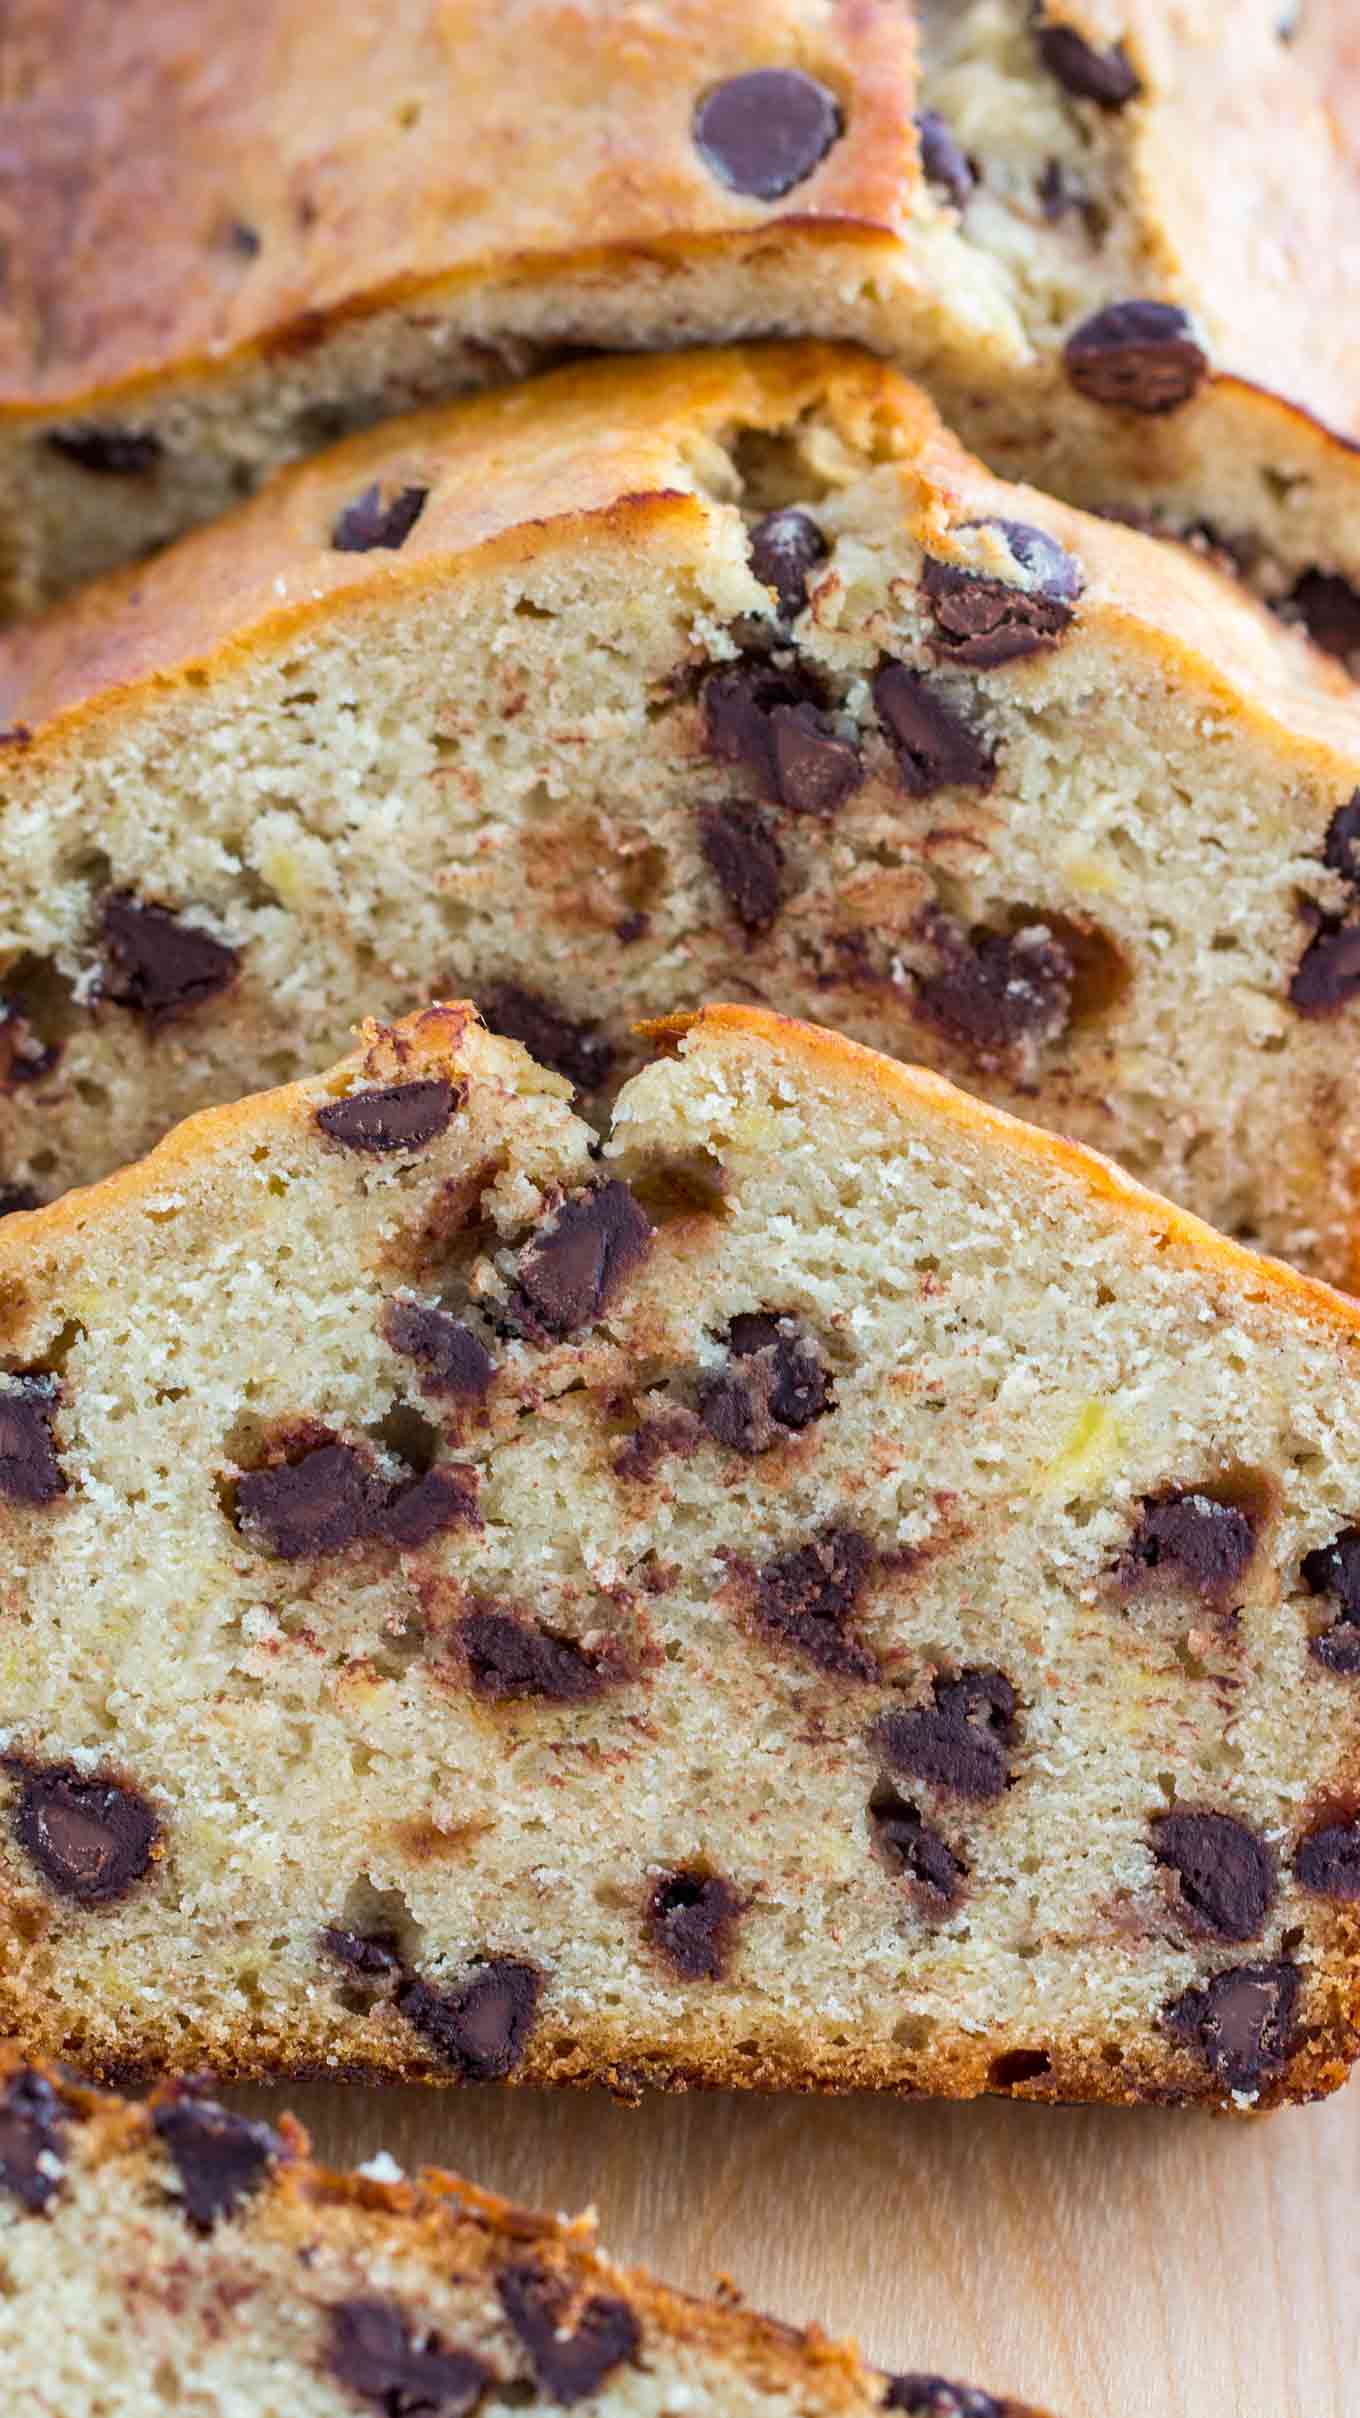 Chocolate Chip Banana Bread [Video] - Sweet and Savory Meals